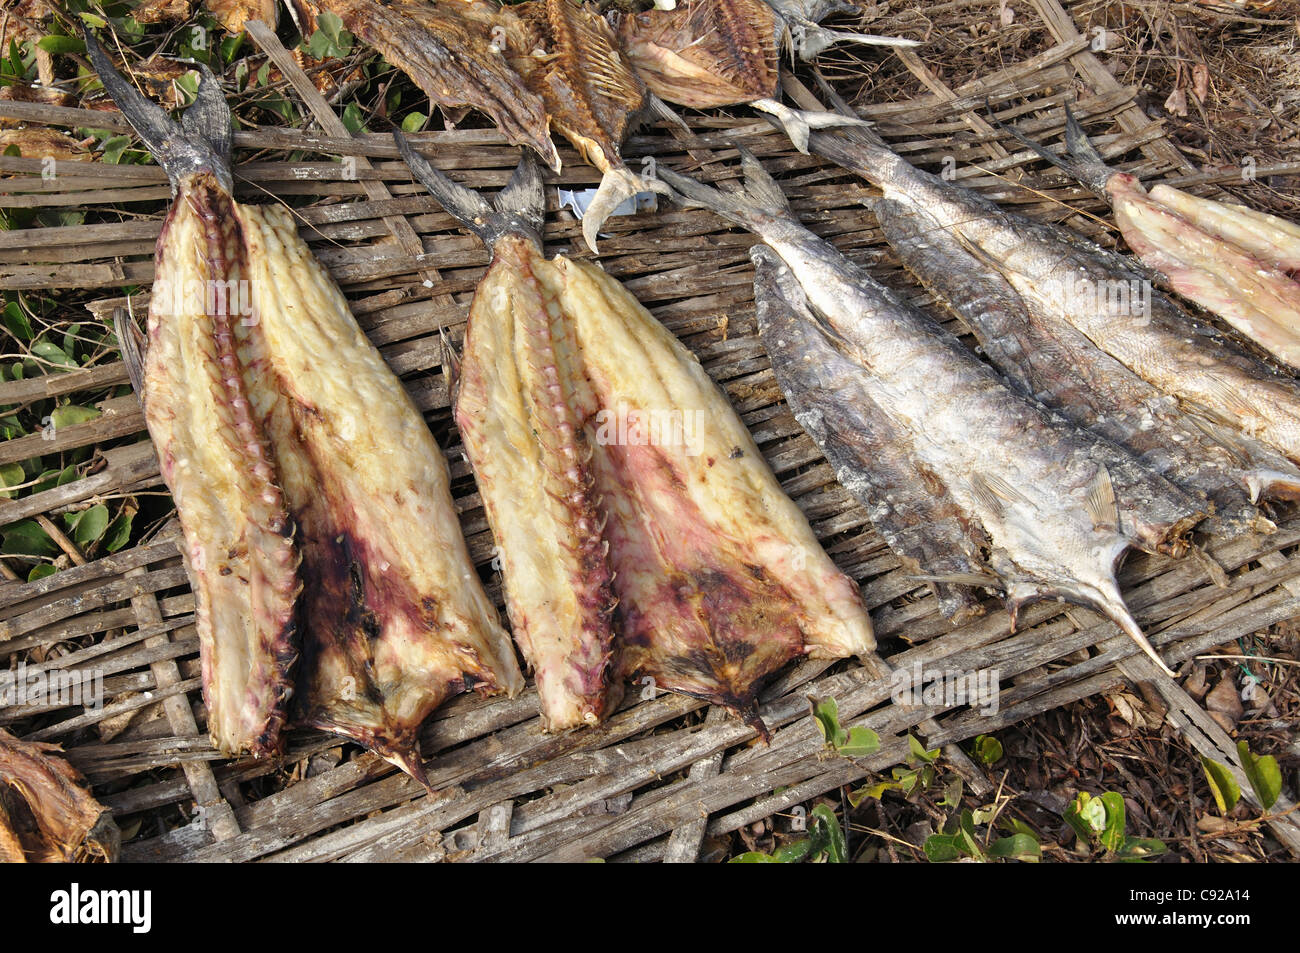 Guinea Bissau is a poor country with a very low GDP and the population survive on subsistence farming and fishing. Drying fish Stock Photo